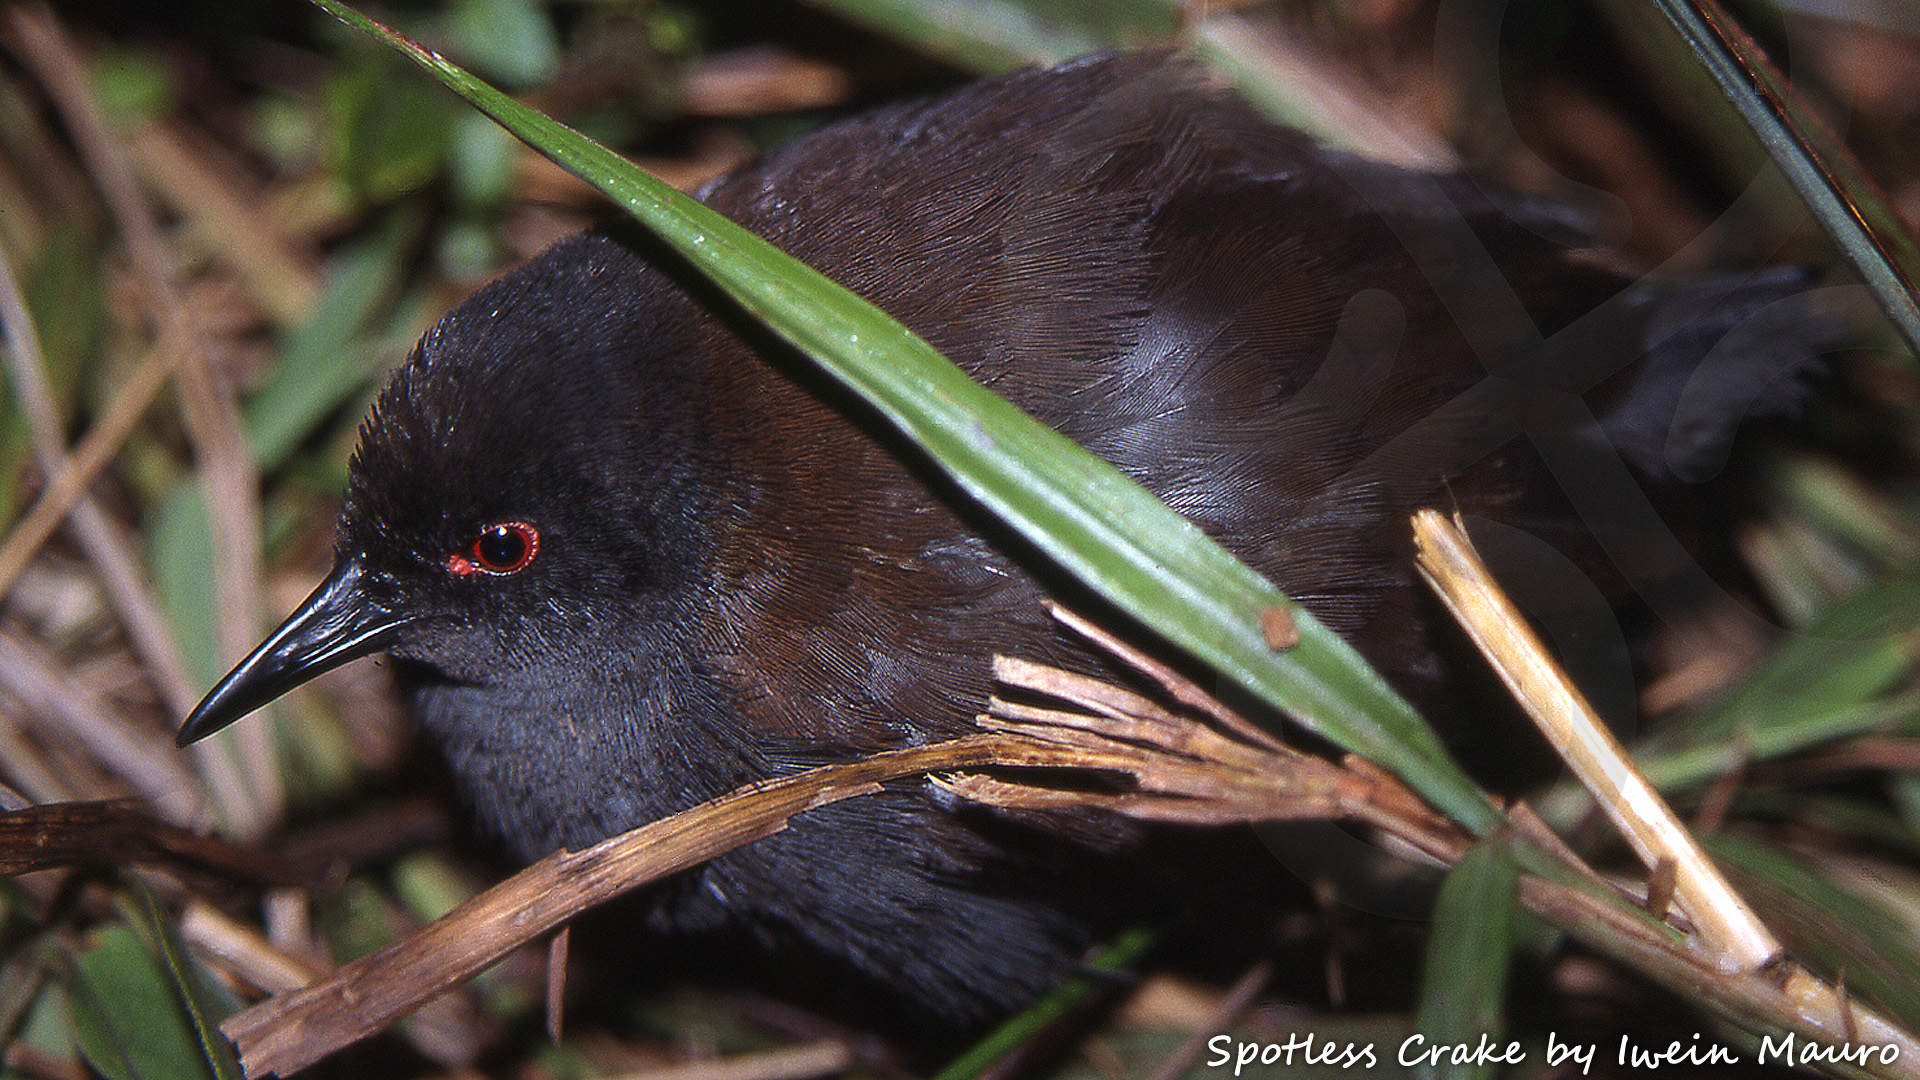 Spotless Crake Zapornia tabuensis is the commonest species of rail in the mid-montane wet grasslands of the Anggi Giji basin in the Arfak Mountains on New Guinea's Bird's Head or Vogelkop Peninsula. Copyright © Iwein Mauro